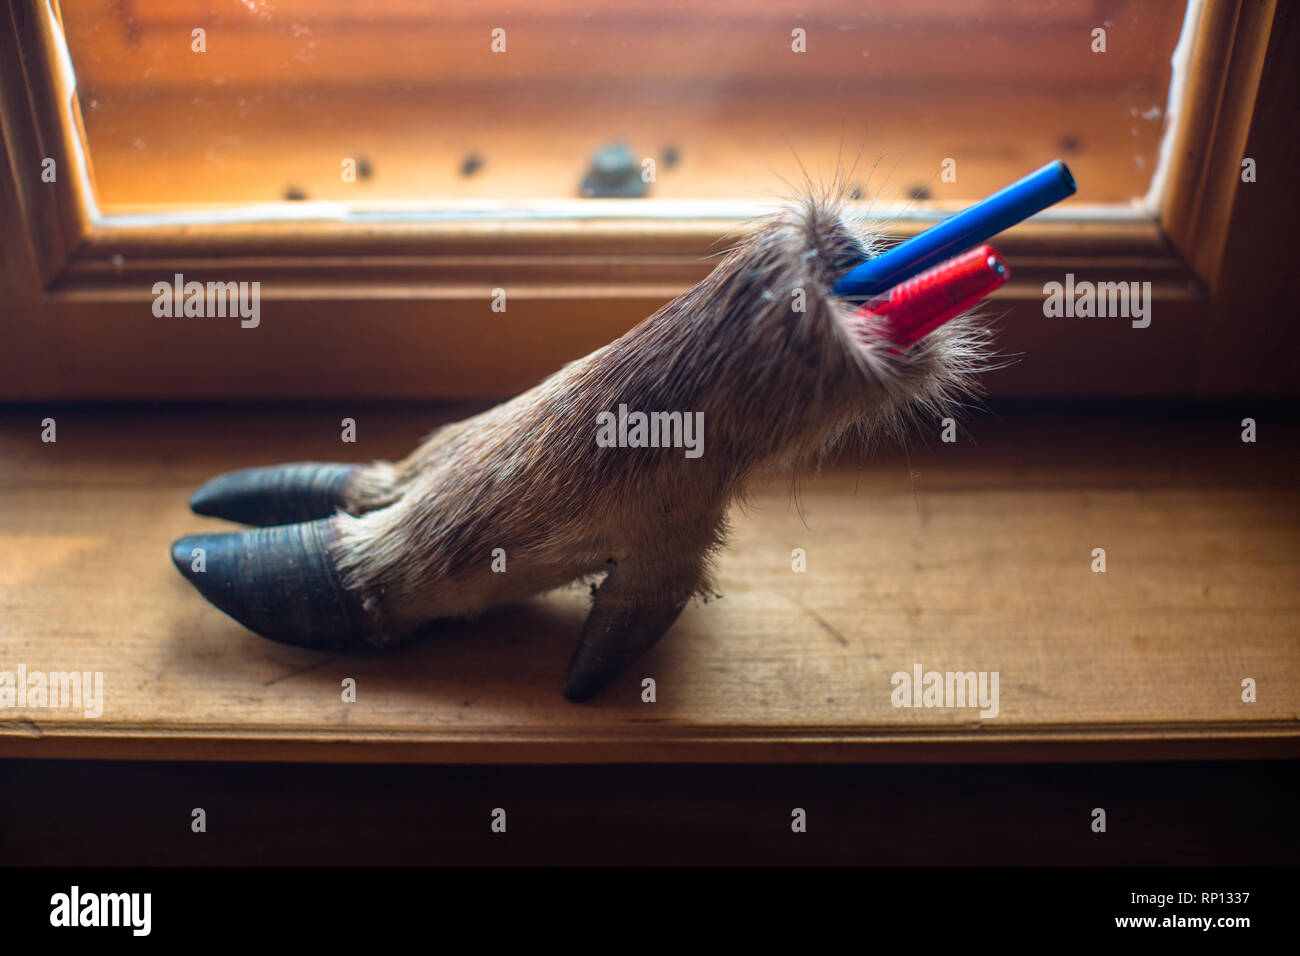 The cloven hoof of boar taxidermied turned into a pen holder. Stock Photo